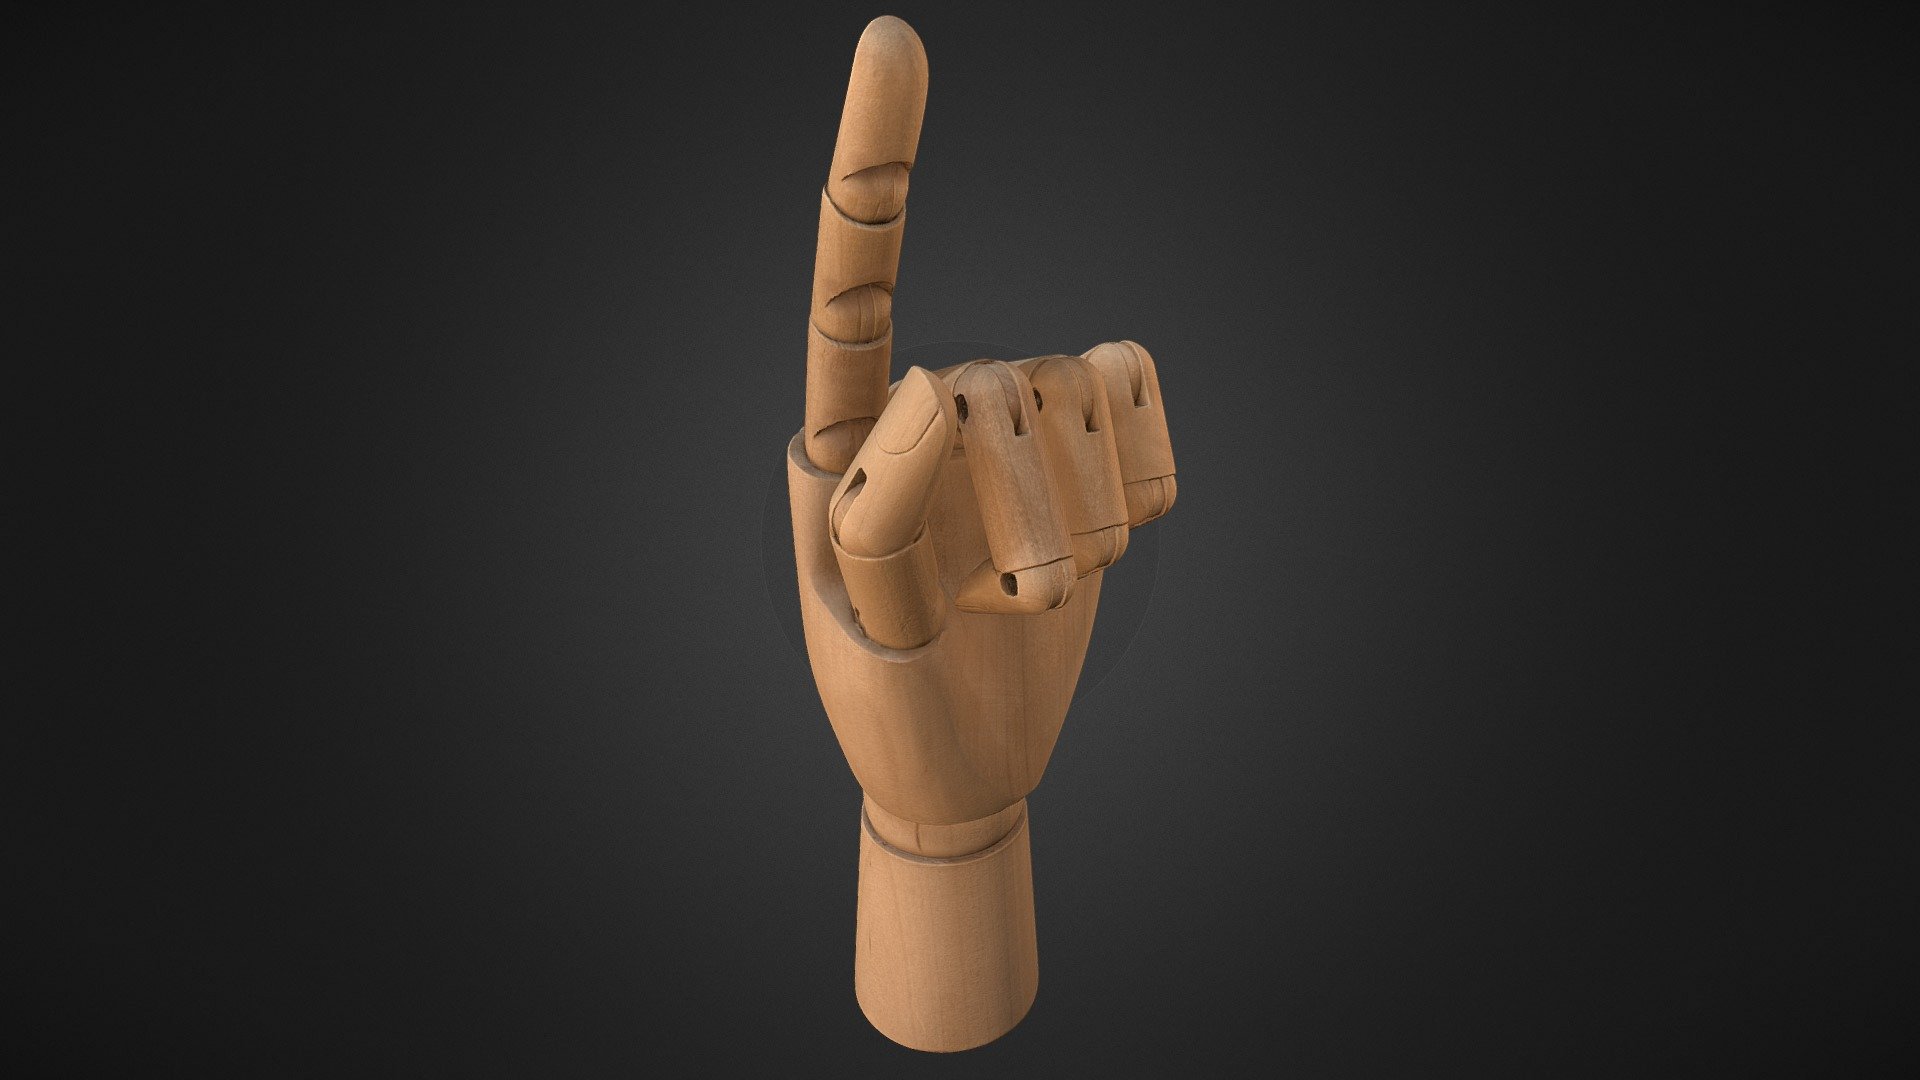 This wooden hand was scanned using photogrammetry with a Sony A7RV through a total of 1400 images. The images had 61MP and were processed in Reality Capture. Provided by me are PBR textures:




Diffuse: 8k

Normal: 8k

Smoothness: 8k

AO: 4k

Cavity: 4k

and Highpoly + Lowpoly retopoligized models. In the preview above you can only see the lowpoly model with normals created from the highpoly model. All models are in separated files. For any questions or problems, please do not hesitate to contact me.

If you buy this asset you will find all important files under “Additional Files”.

Feedback in form of a comment or by pressing the star is very welcome.

Lowpoly -&gt; 77.431 Polygons

Highpoly -&gt; 19.82M Polygons - Wooden model hand - Buy Royalty Free 3D model by Gewoelbe3DScan (@3dgewoelbescan) 3d model